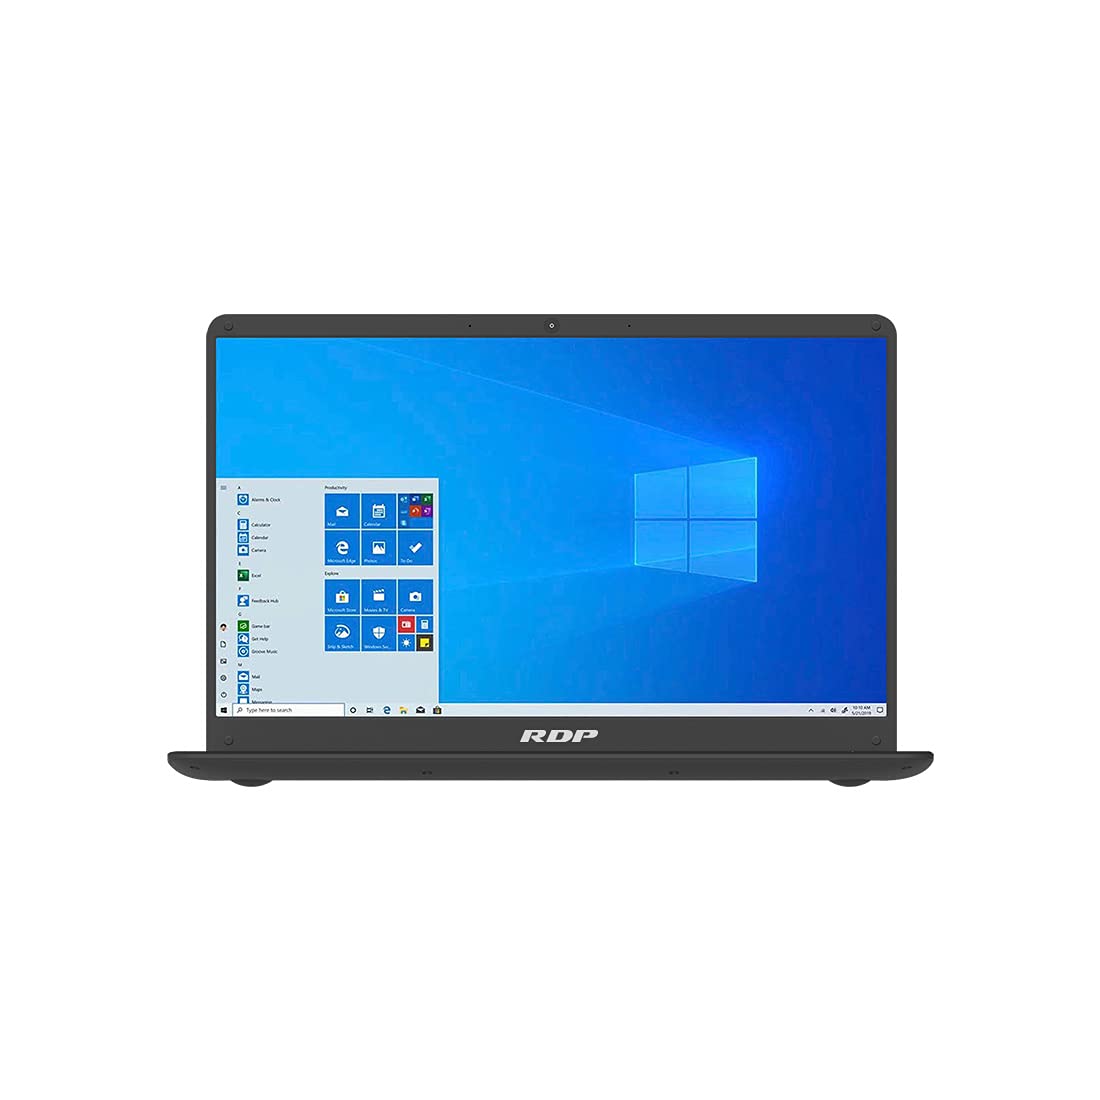 Amazon Navratri Sale: In addition to bumper discount on laptops in Amazon's festival sale, do not miss the chance to get additional discount of up to 20 thousand rupees.